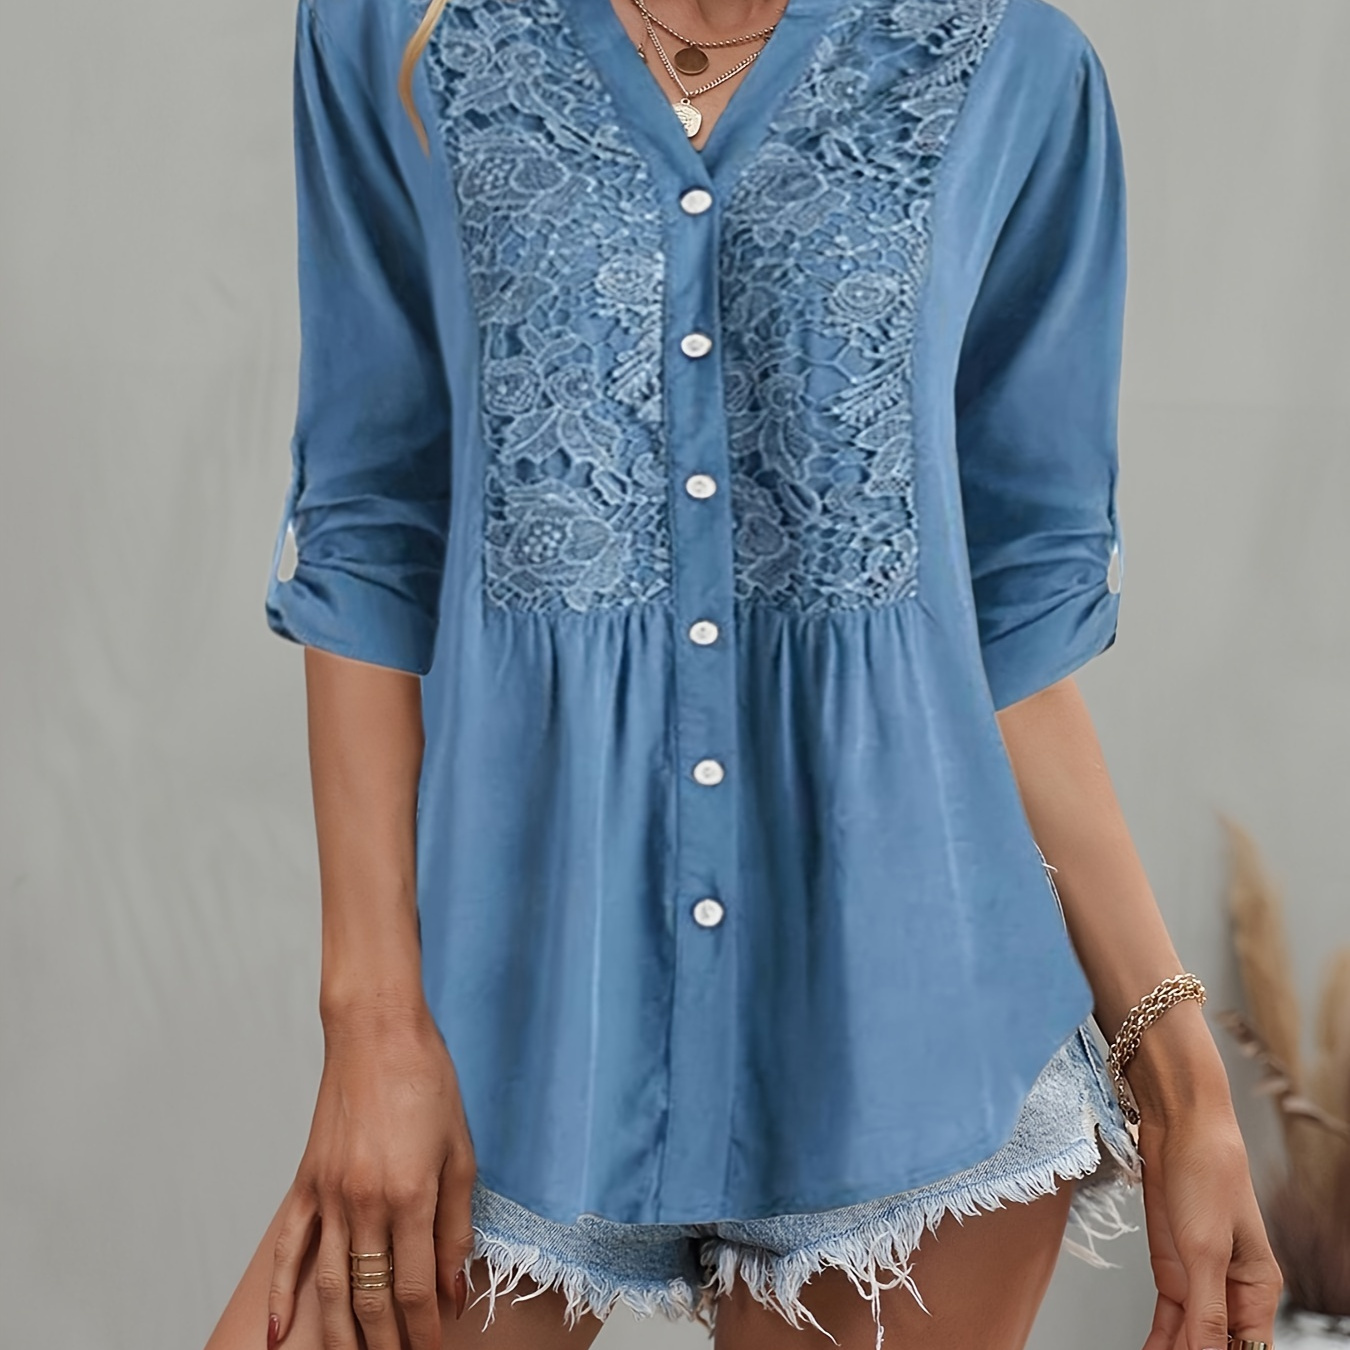 Contrast Lace Solid Shirt, Elegant Button Front Rollable Sleeve Shirt, Women's Clothing